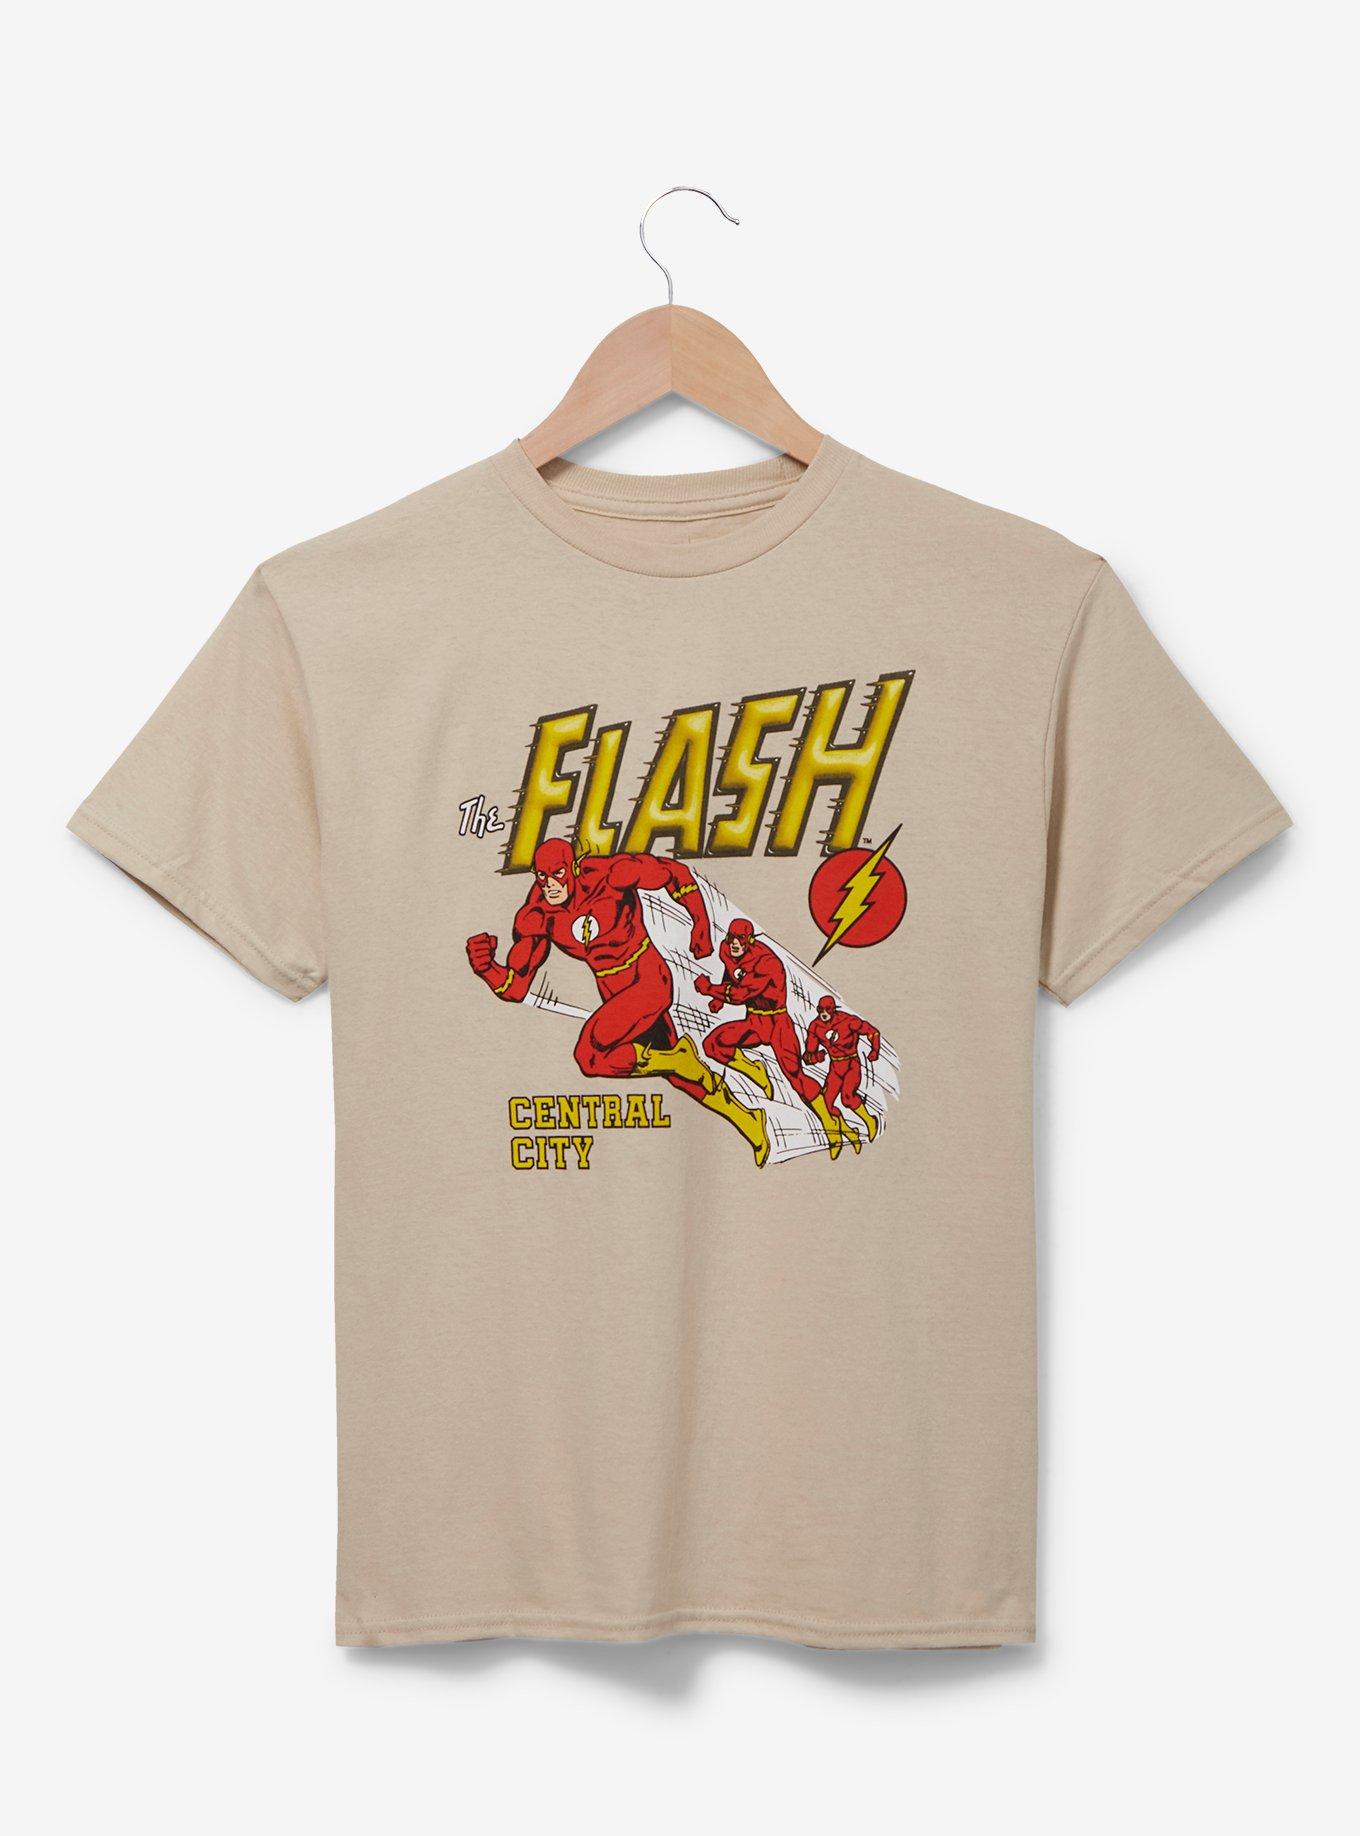 OFFICIAL The Flash Merchandise & Shirts | BoxLunch